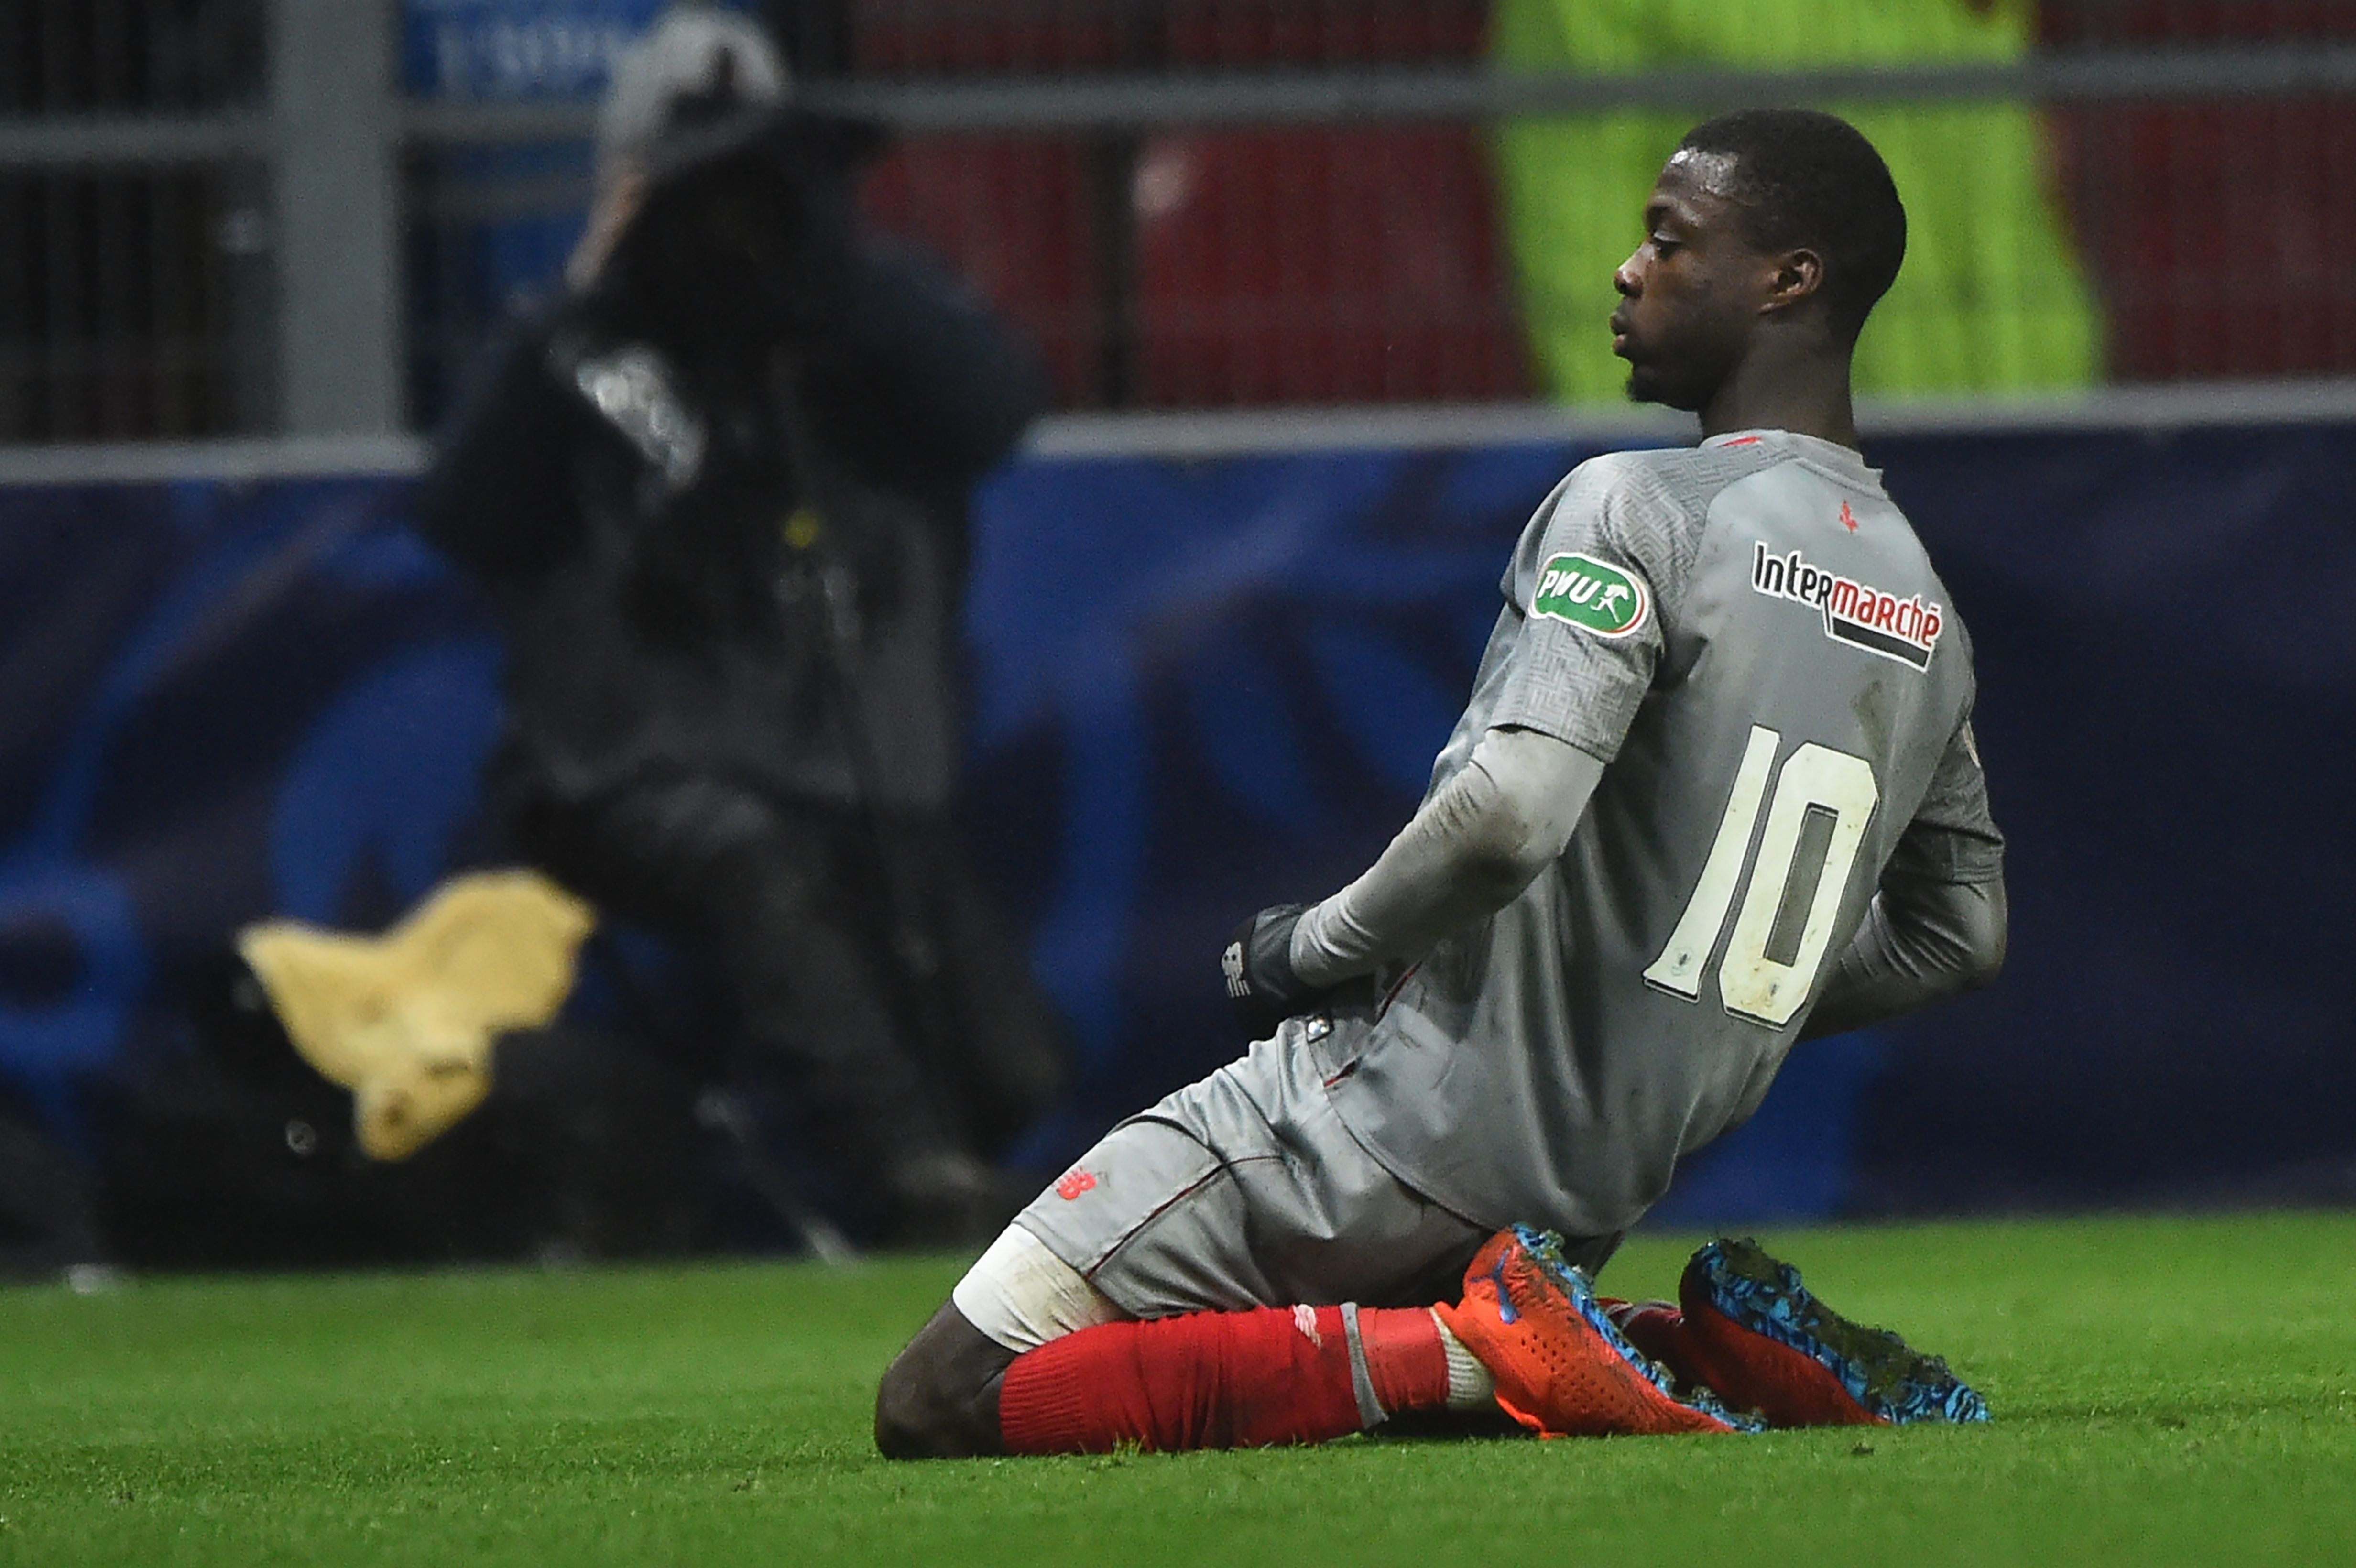 Lille's Ivorian forward Nicolas Pepe celebrates after scoring a goal during the French Cup round of 16 football match between Rennes and Lille on February 6, 2019 at the Roazhon Park in Rennes, northwestern France. (Photo by JEAN-FRANCOIS MONIER / AFP)        (Photo credit should read JEAN-FRANCOIS MONIER/AFP/Getty Images)